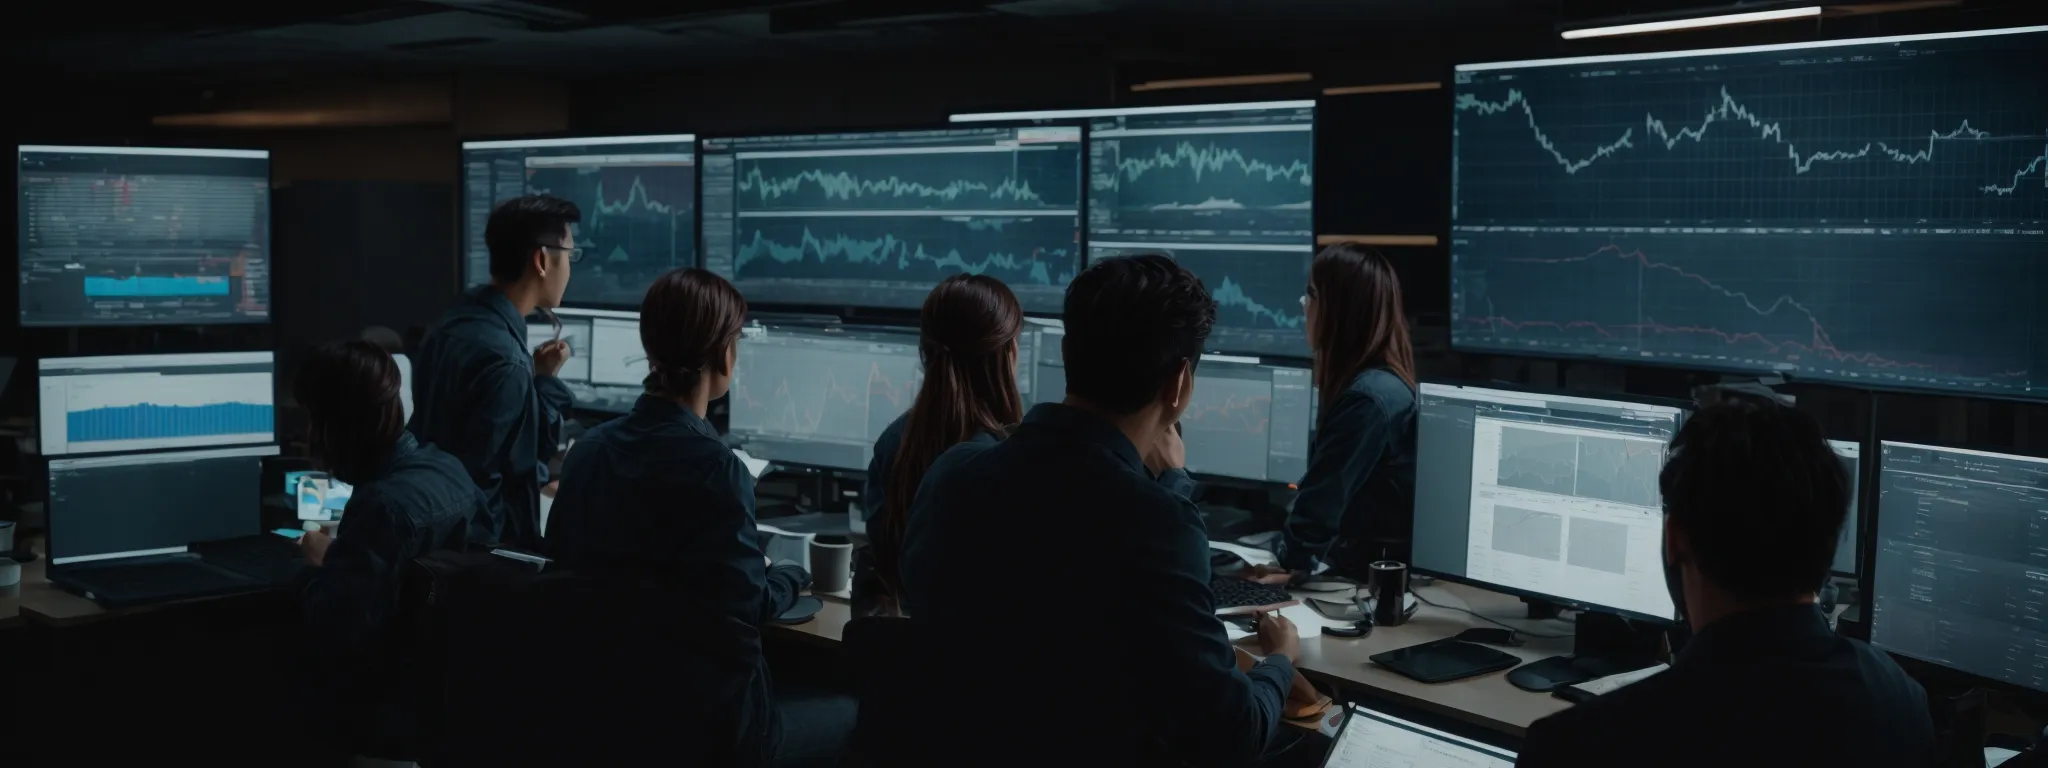 a group of professionals gathered around a large computer screen, analyzing graphs and data related to website traffic.